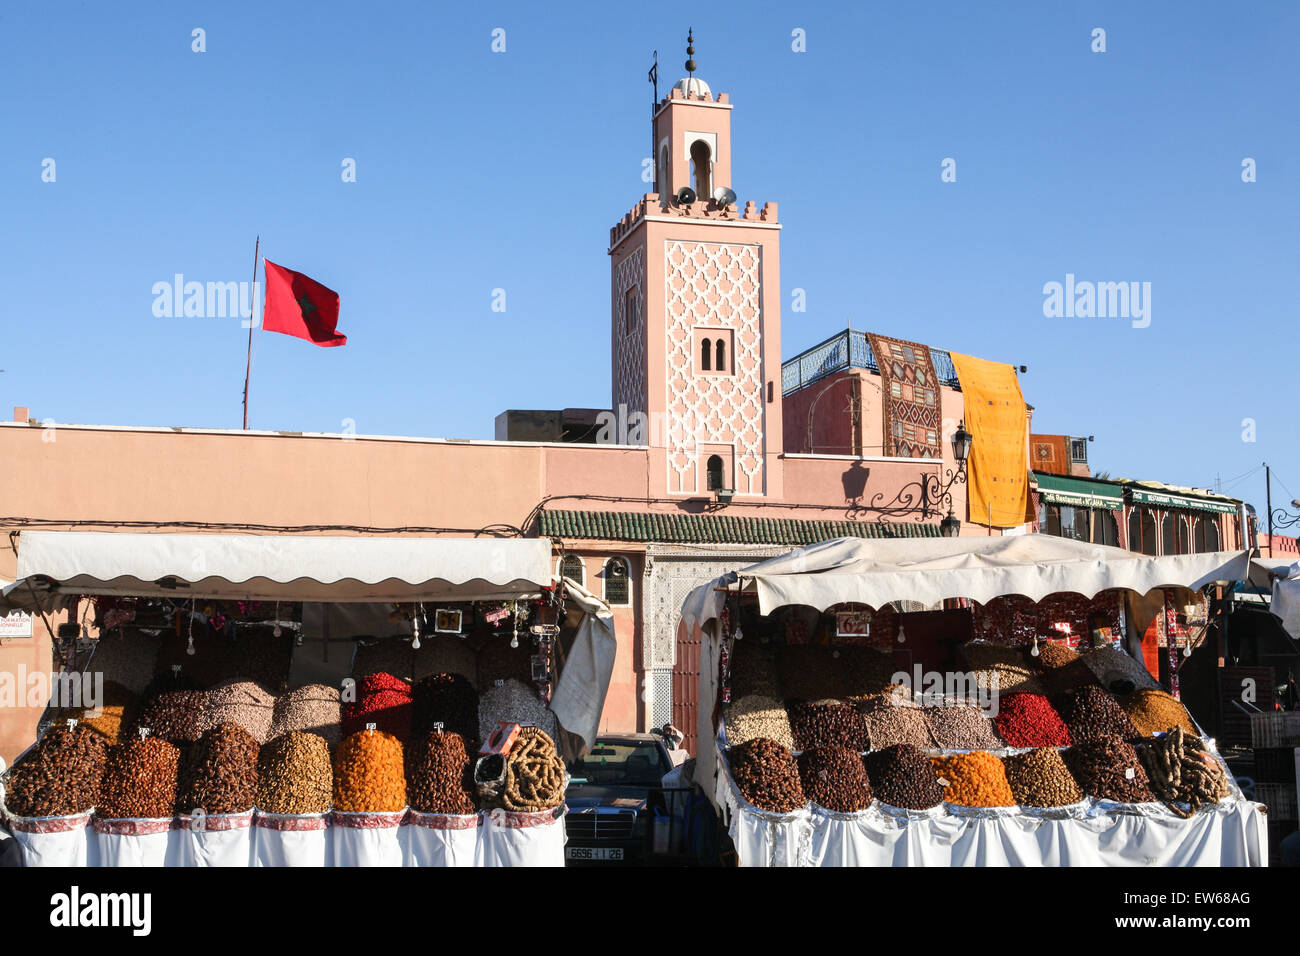 Fruit and nuts for sale at this street stall on,Djemaa, Djamaa El Fna,the main square in Marrakesh with mosque in the background, Marrak Stock Photo